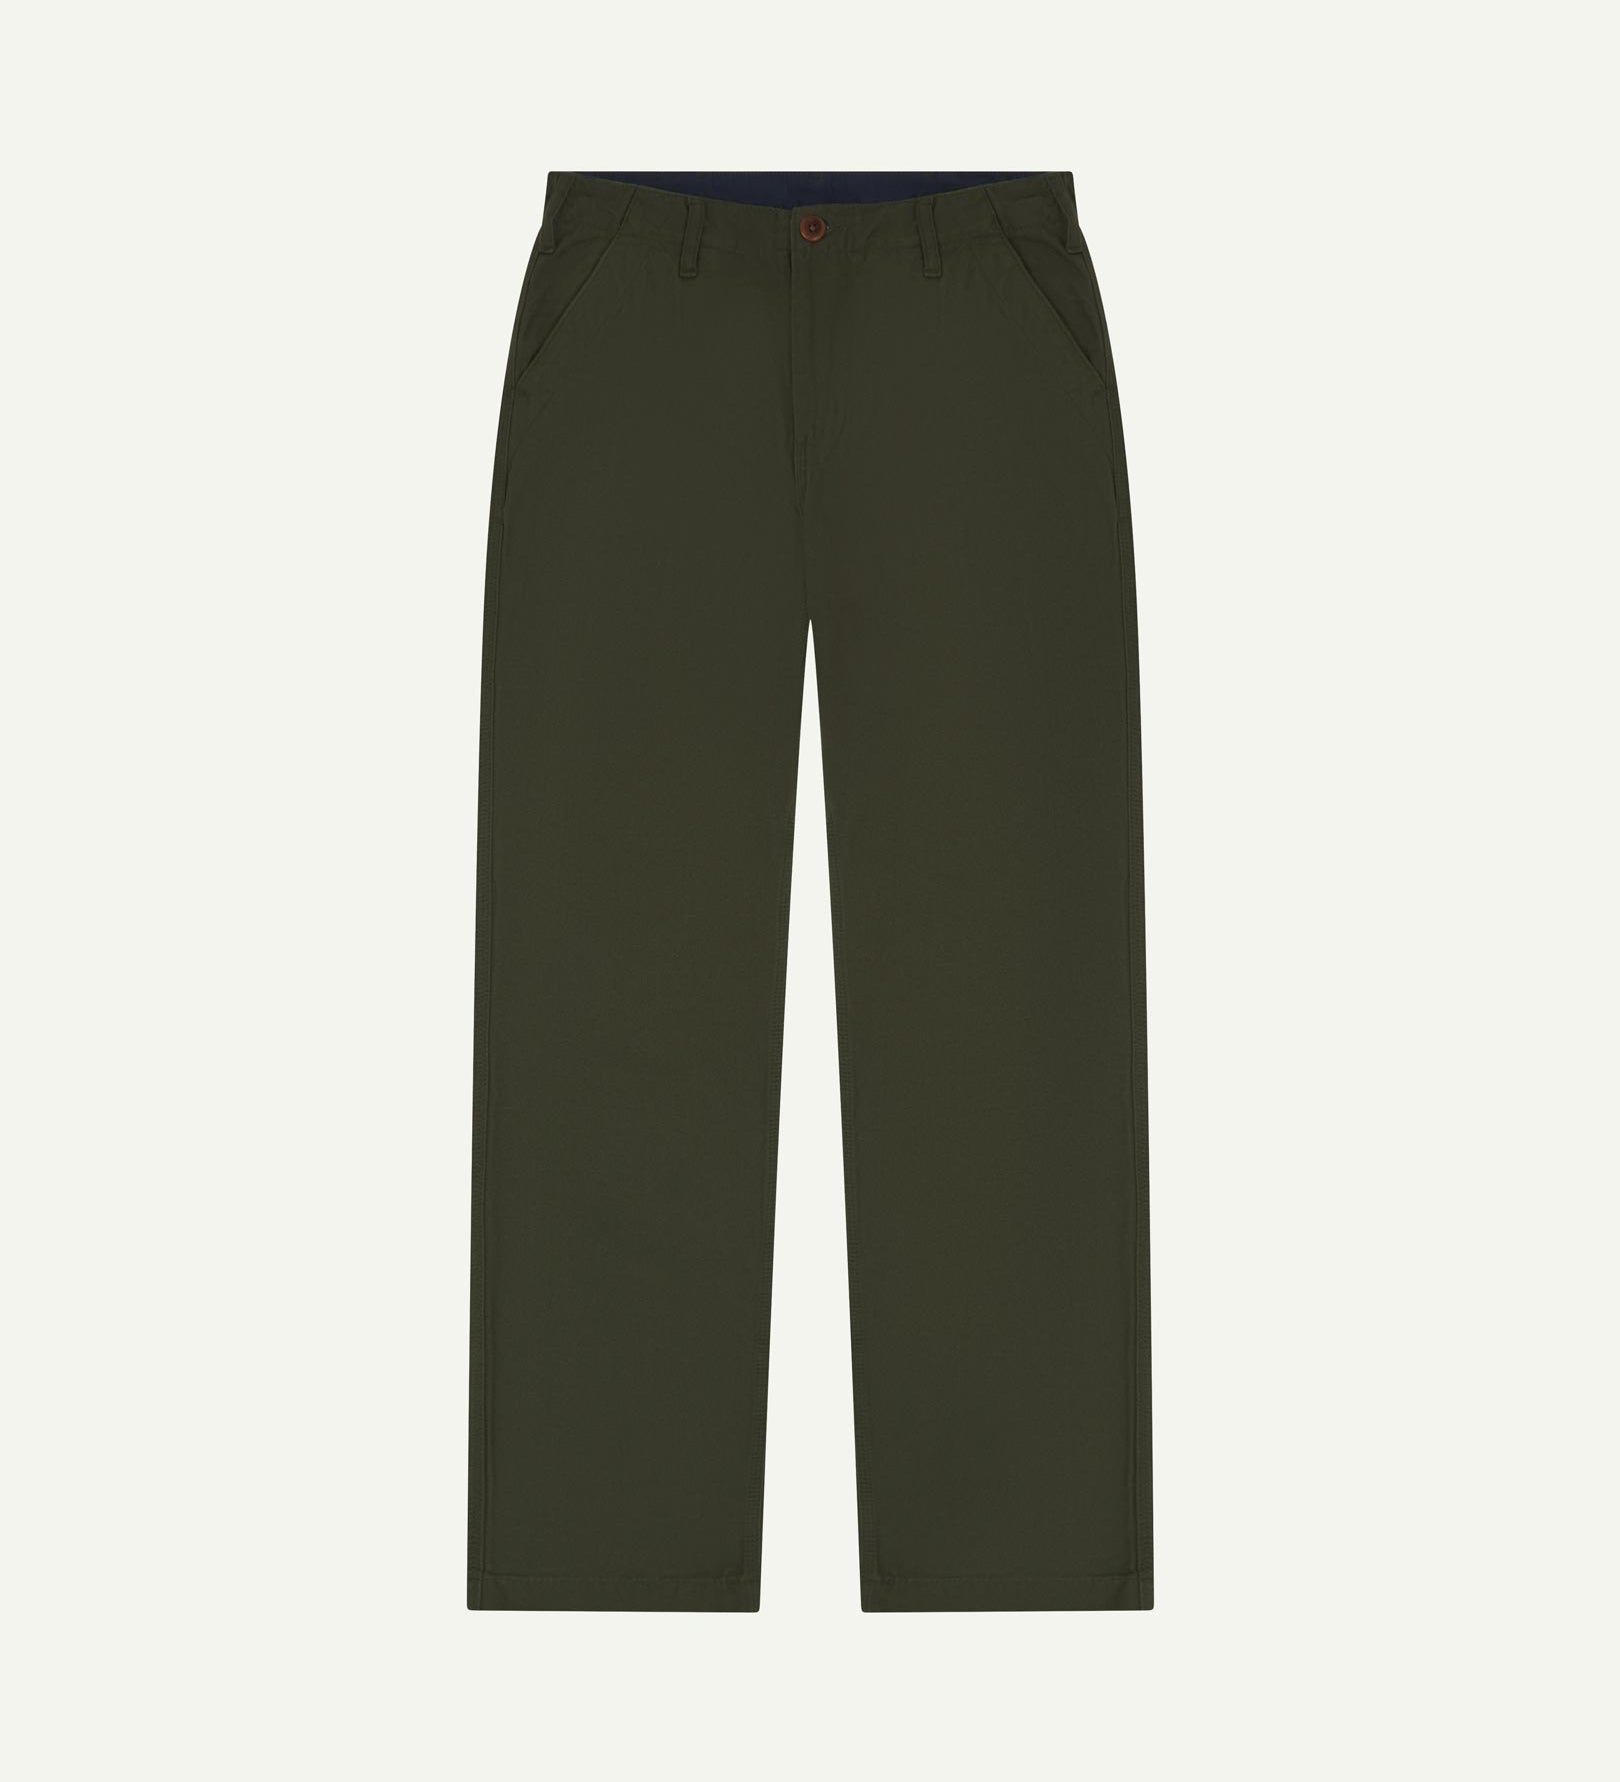 Front flat view of 5005 Uskees men's organic cotton vine green casual trousers with view of YKK zip fly and Corozo buttons.